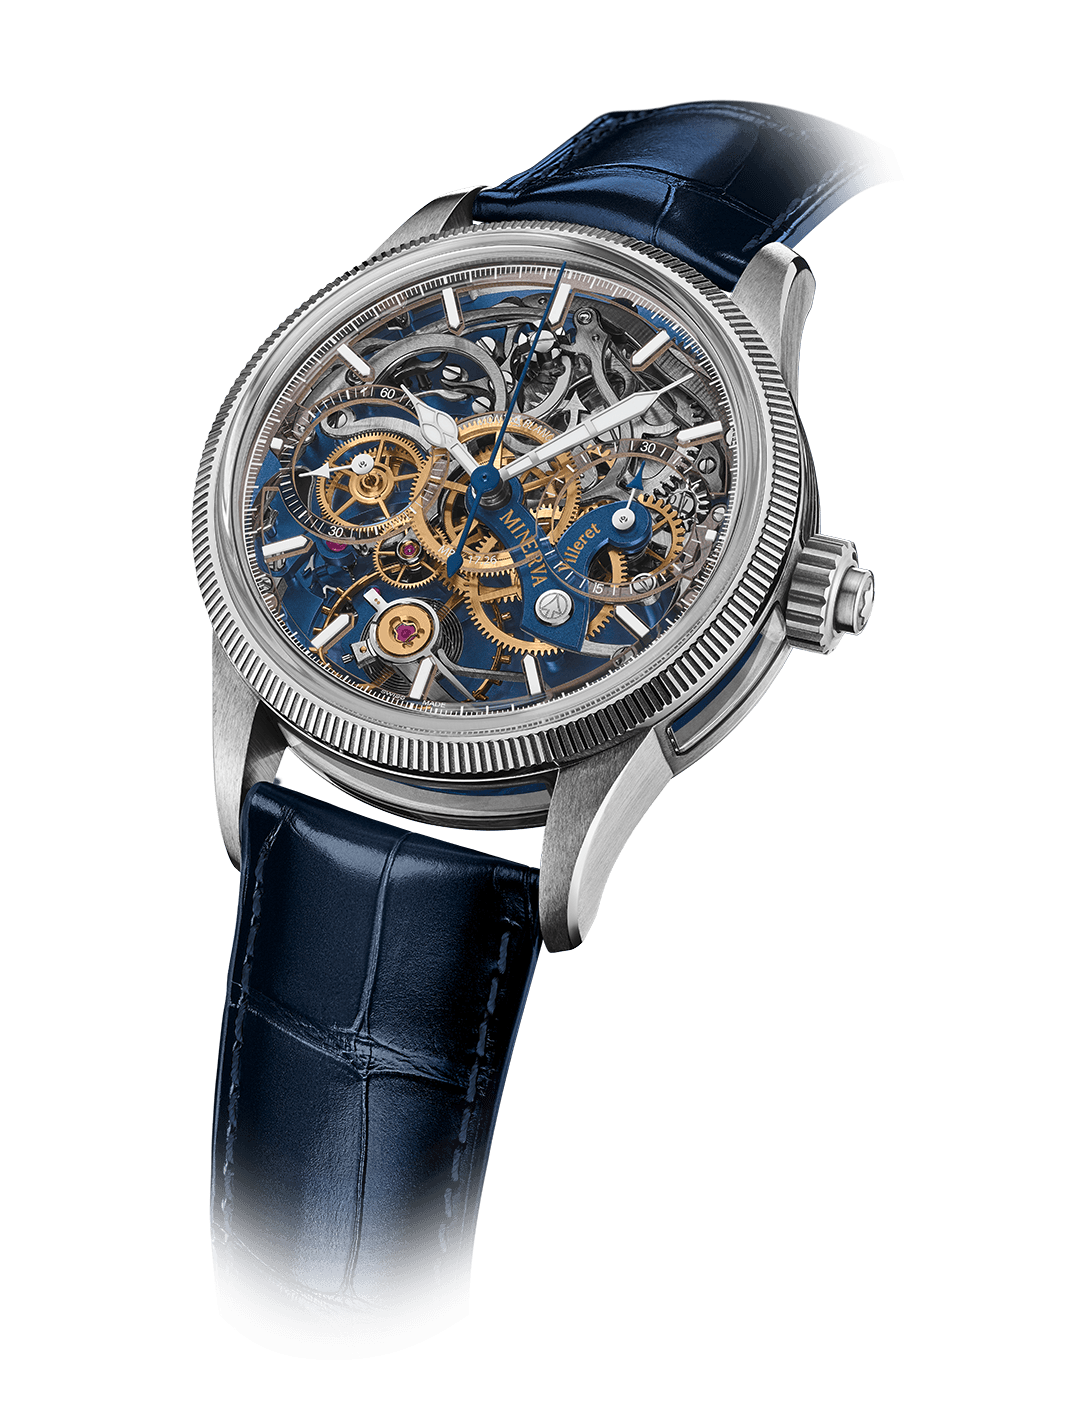 The Unveiled Minerva Monopusher Chronograph has a case with display windows